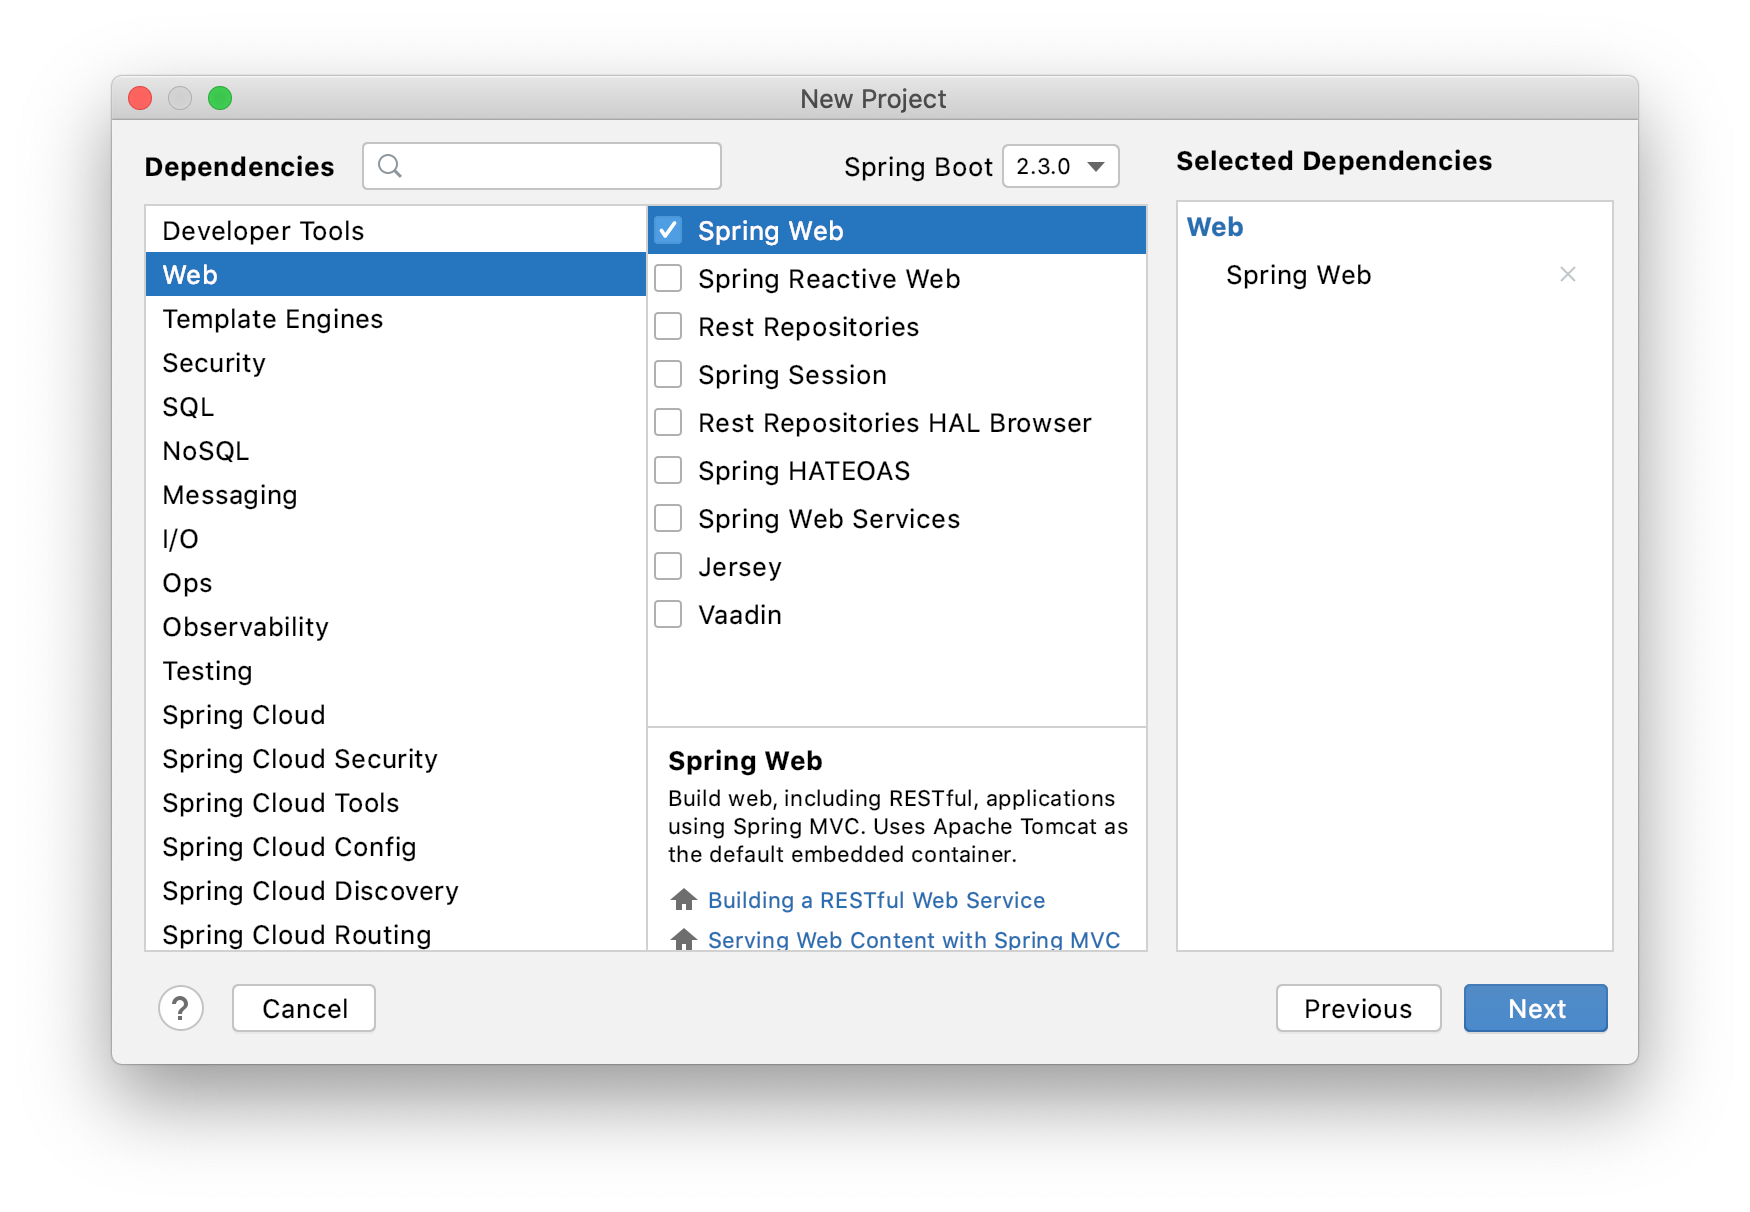 Spring Dependencies in the New Project wizard